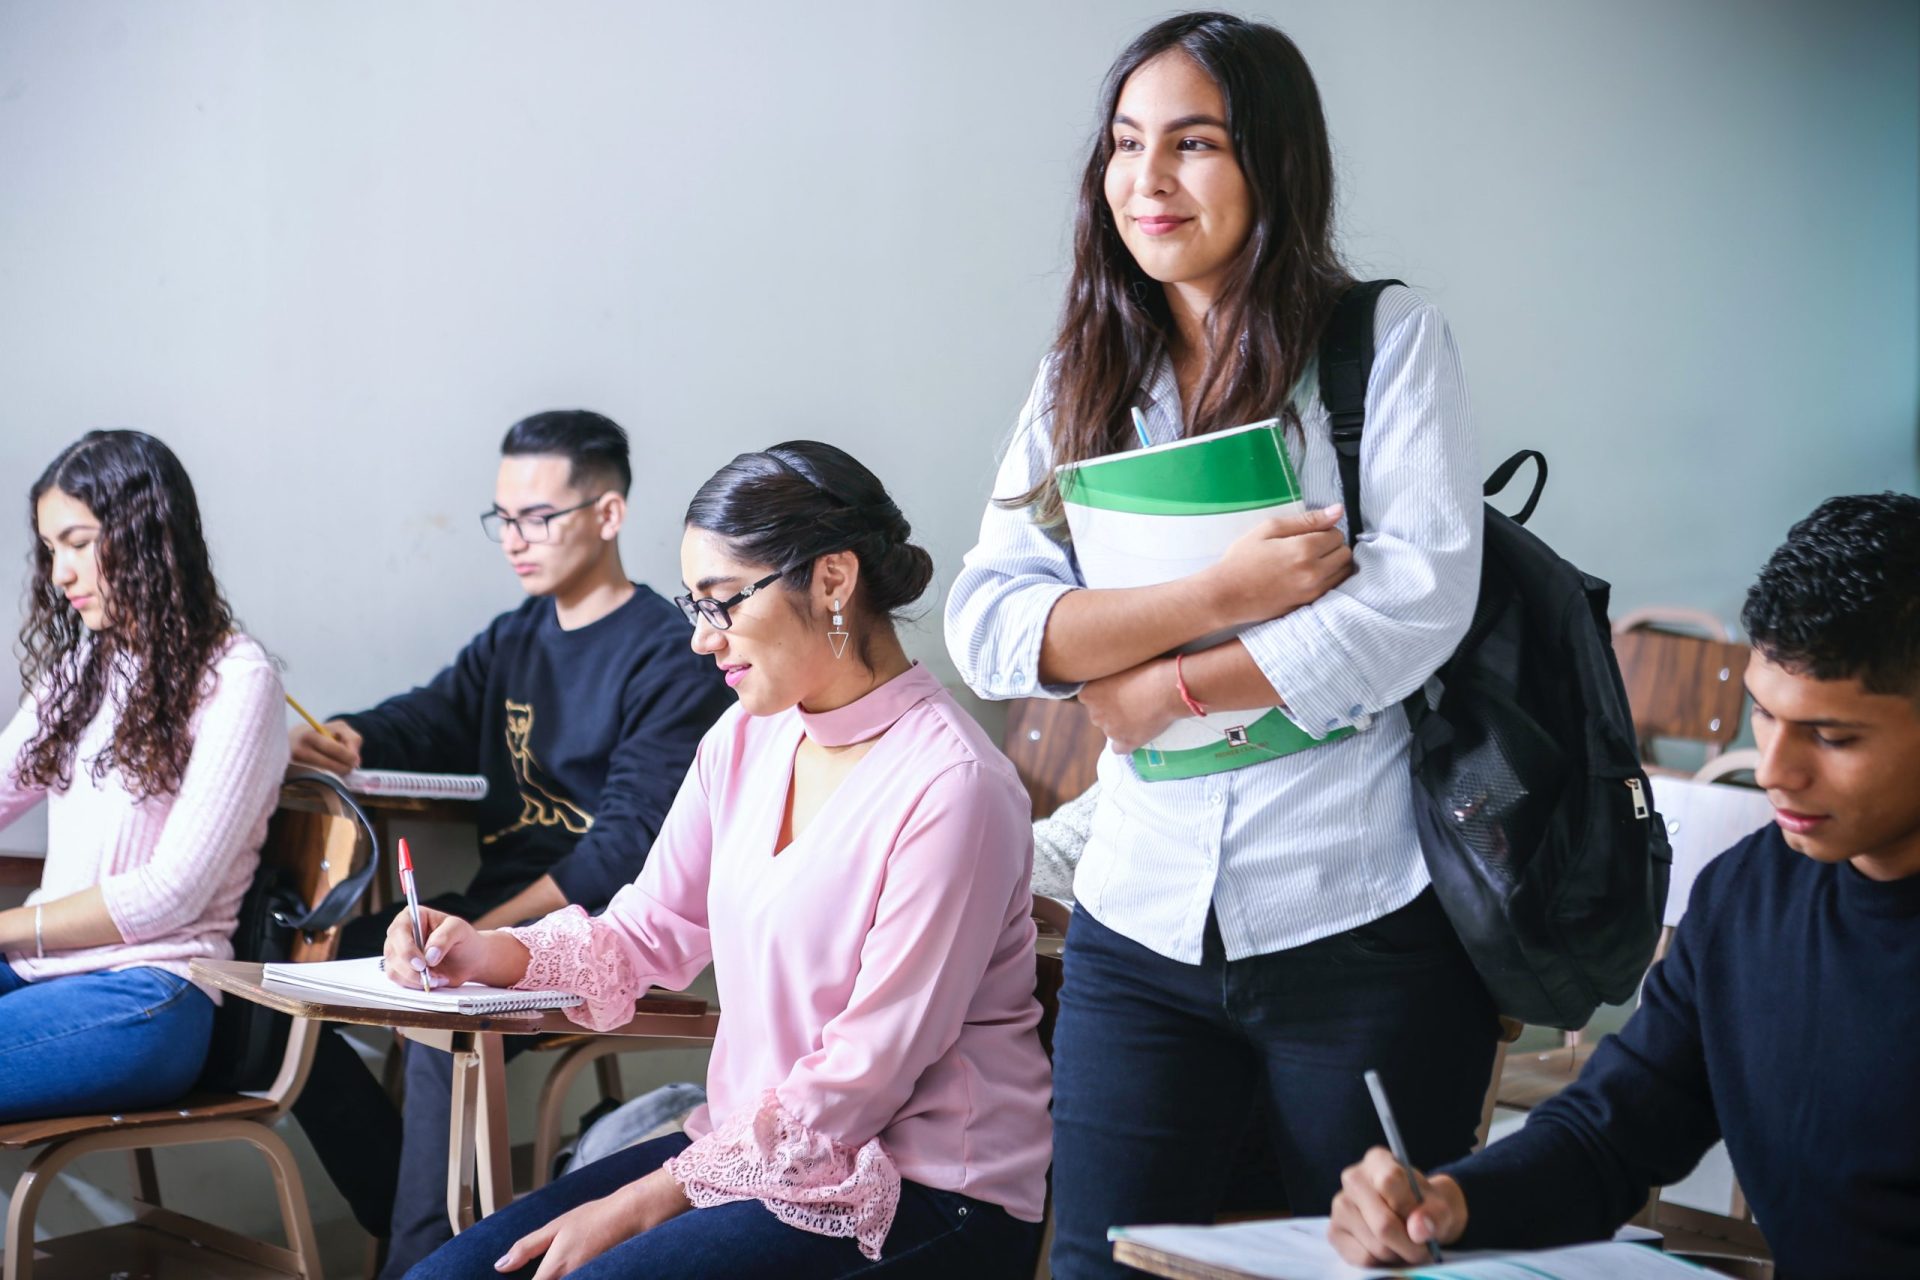 Woman student standing in classroom with other students